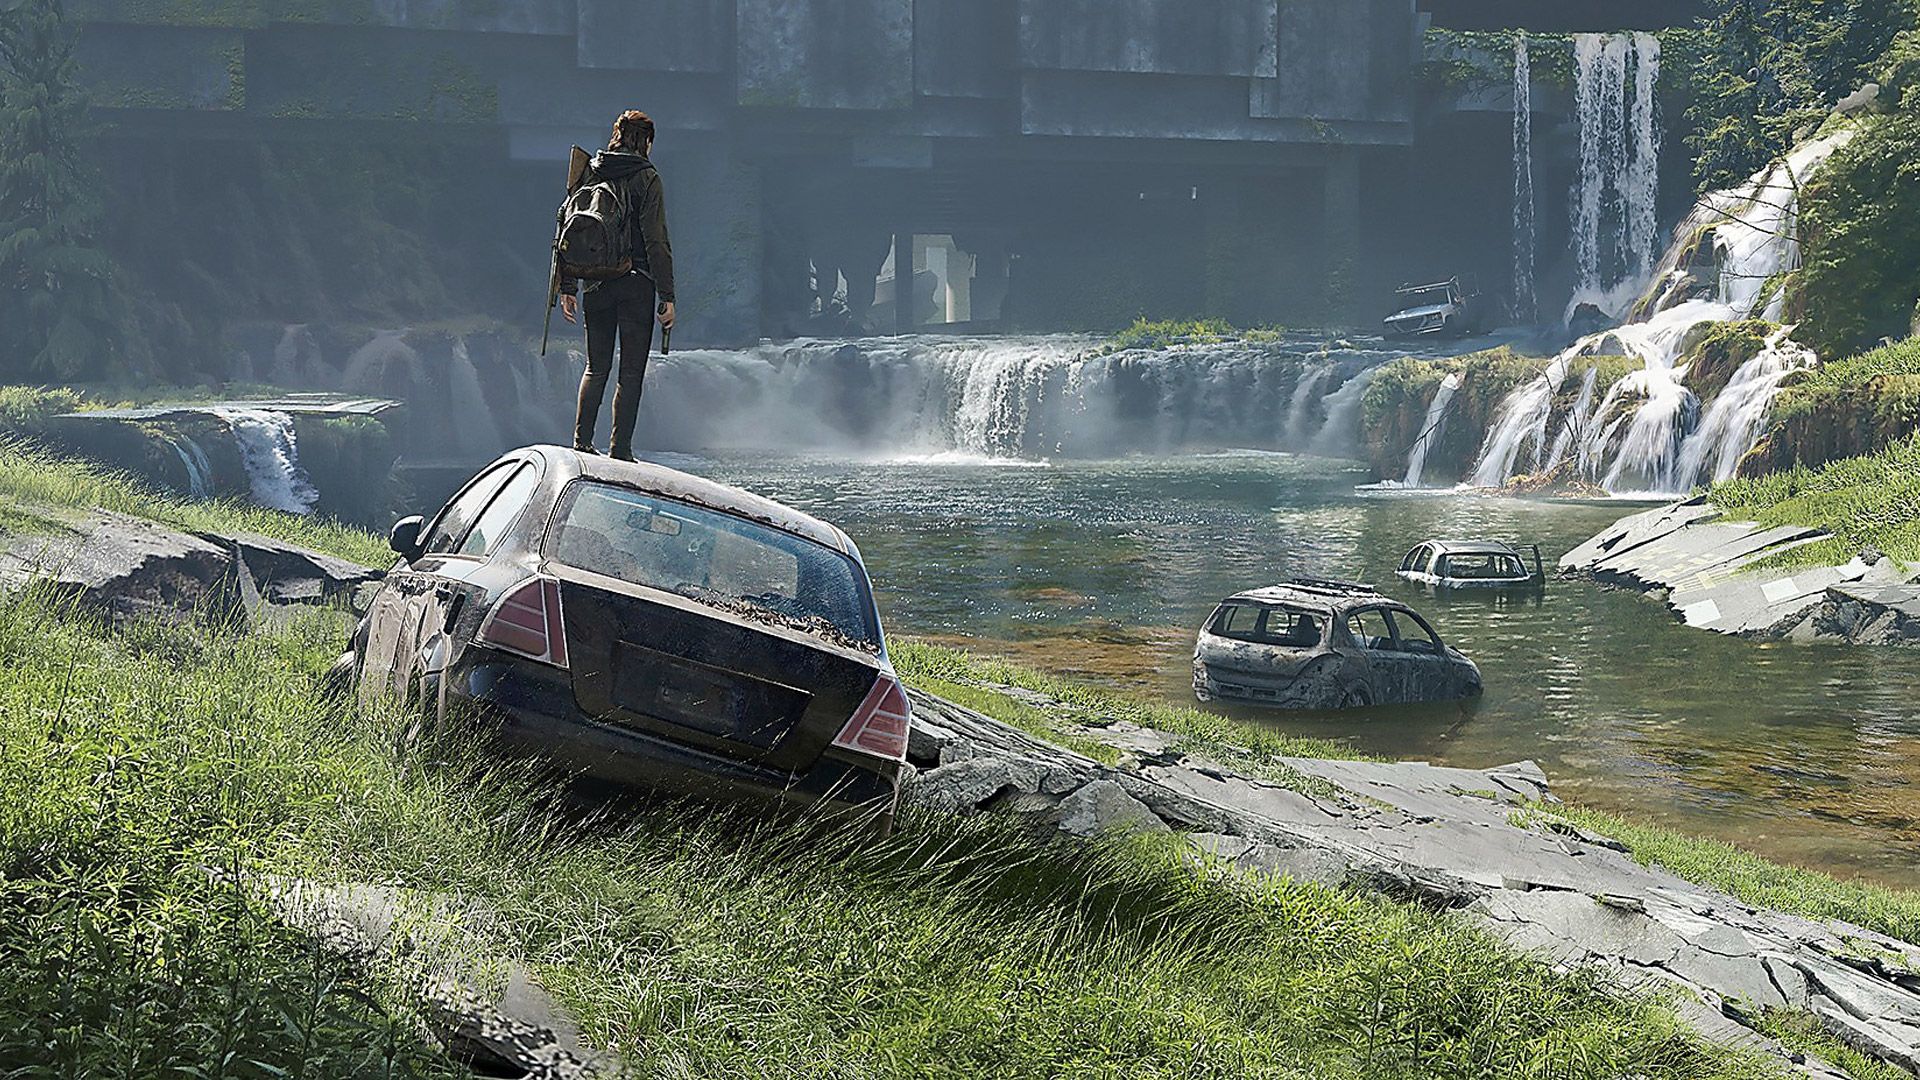 HD The Last of Us Part 2 Wallpaper 69698 1920x1080px